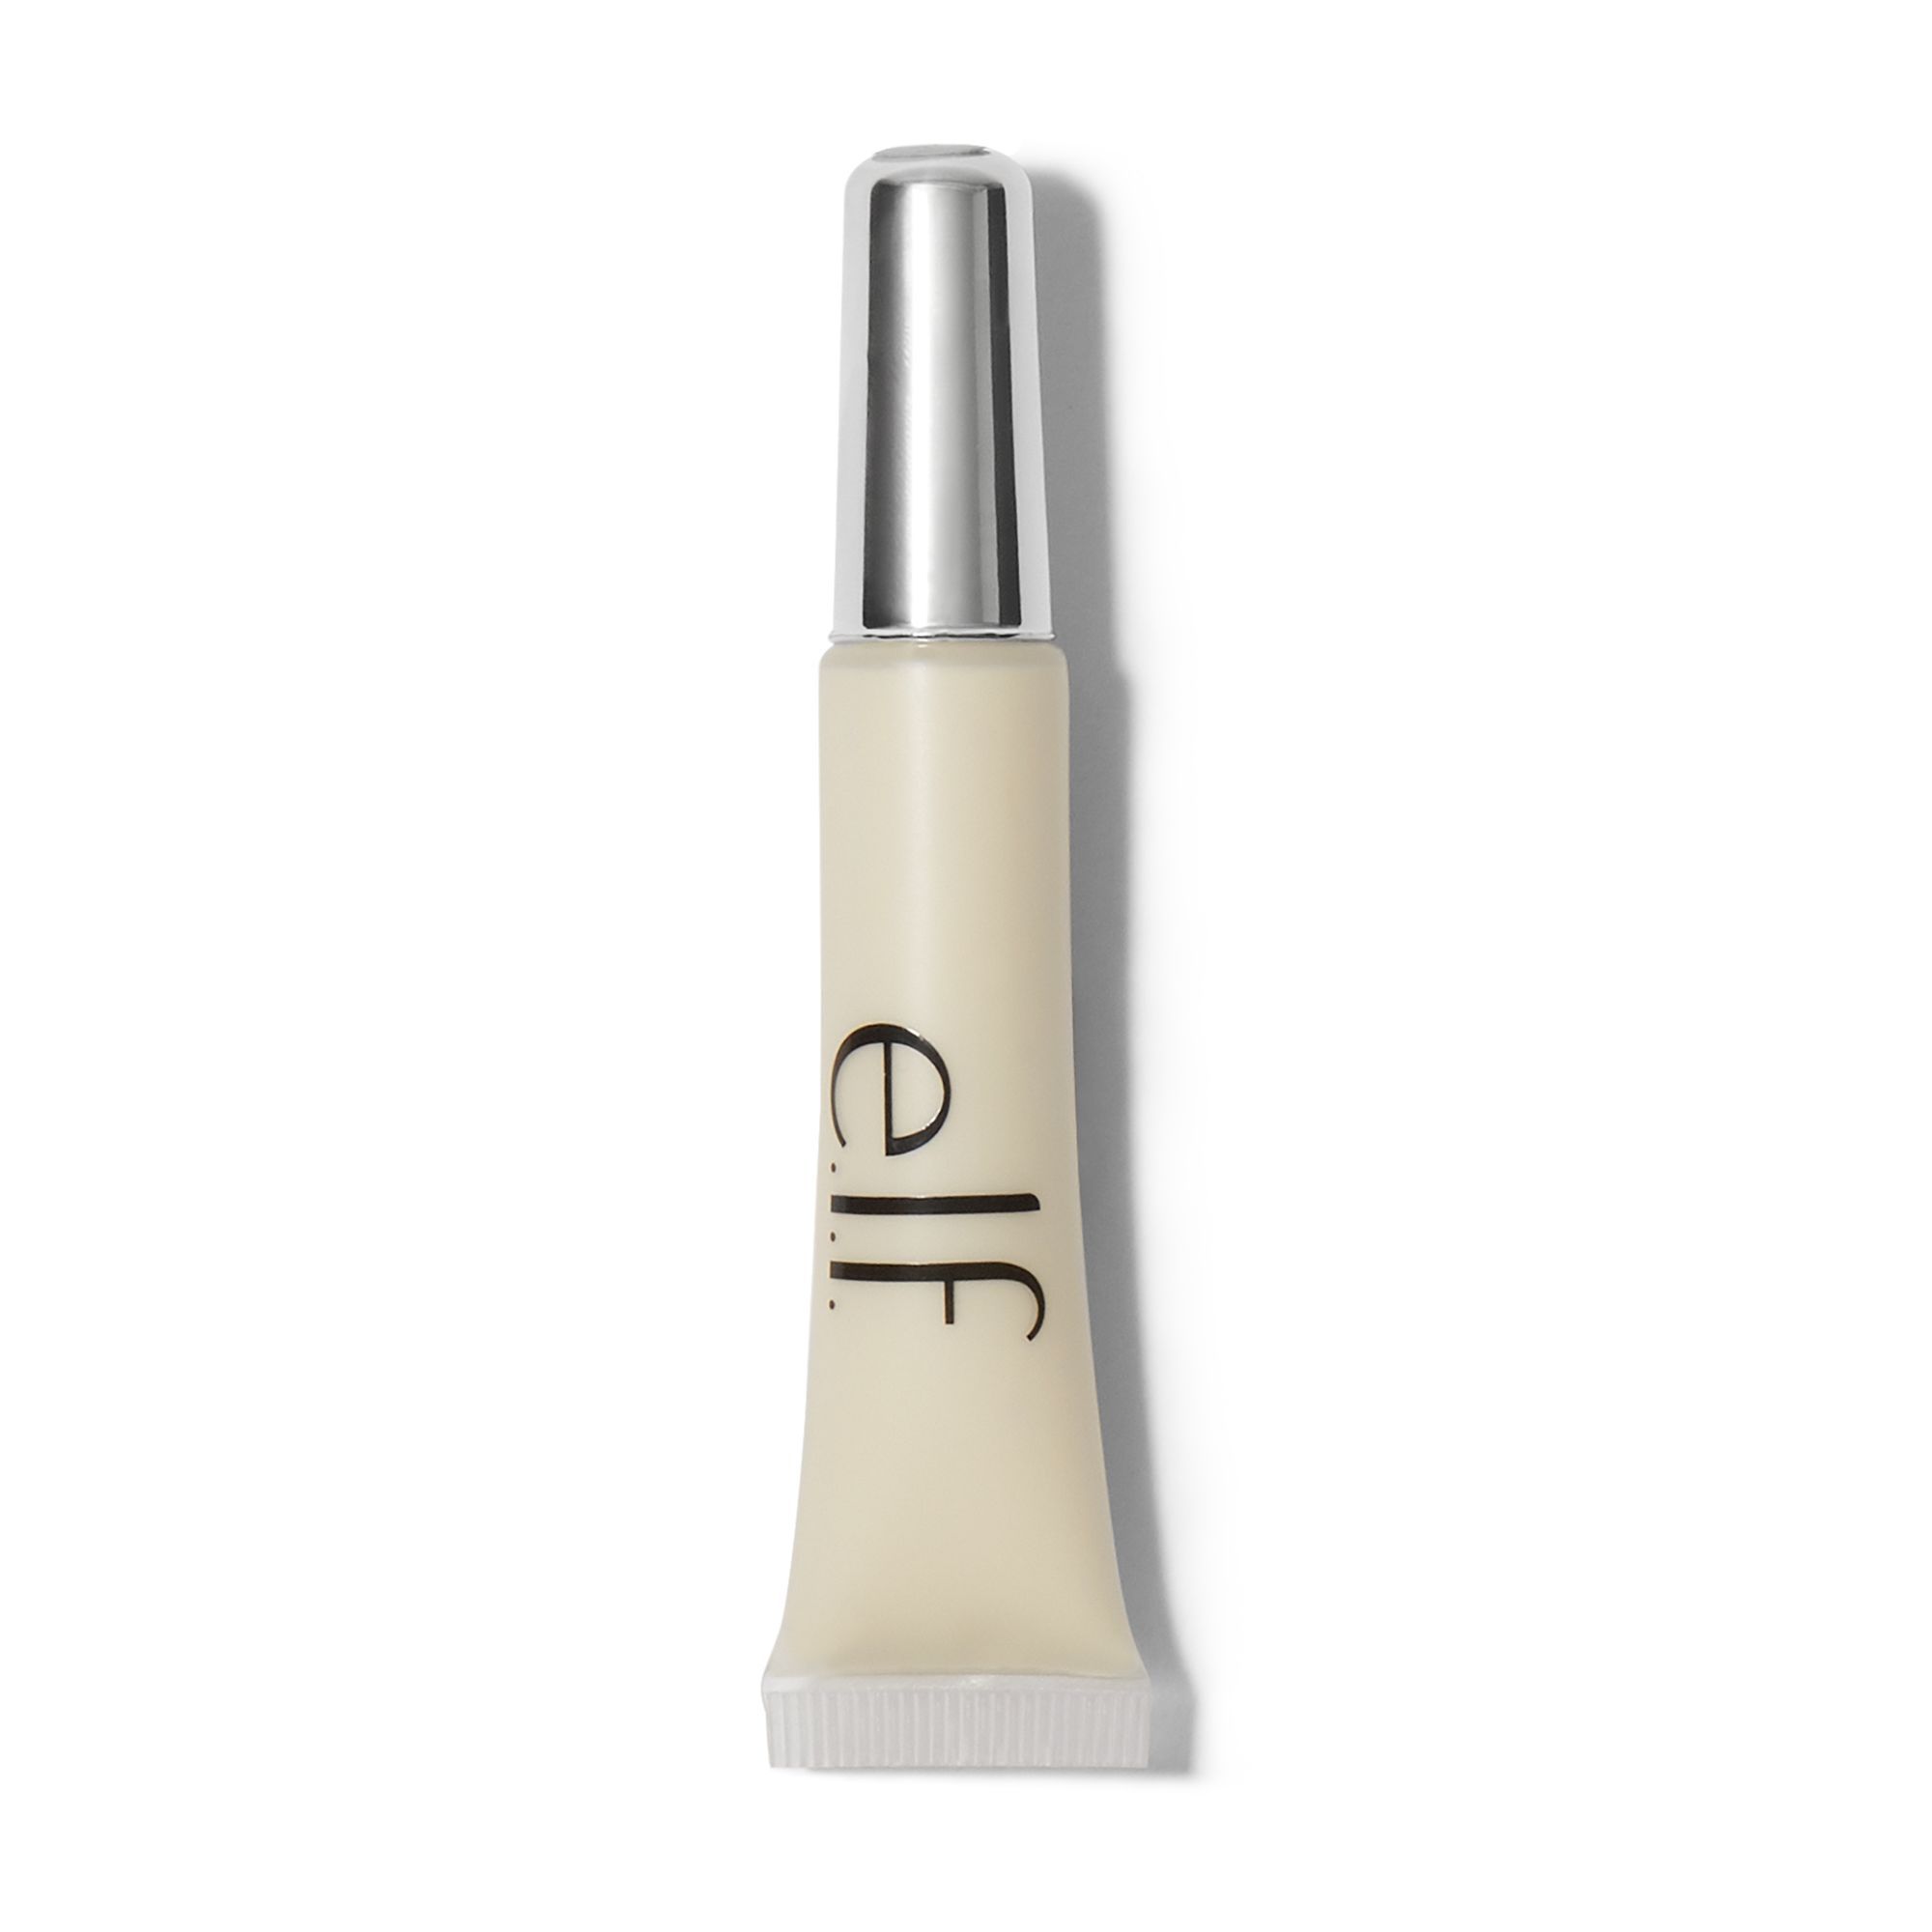 8 e.l.f. cosmetics products you didn’t know existed